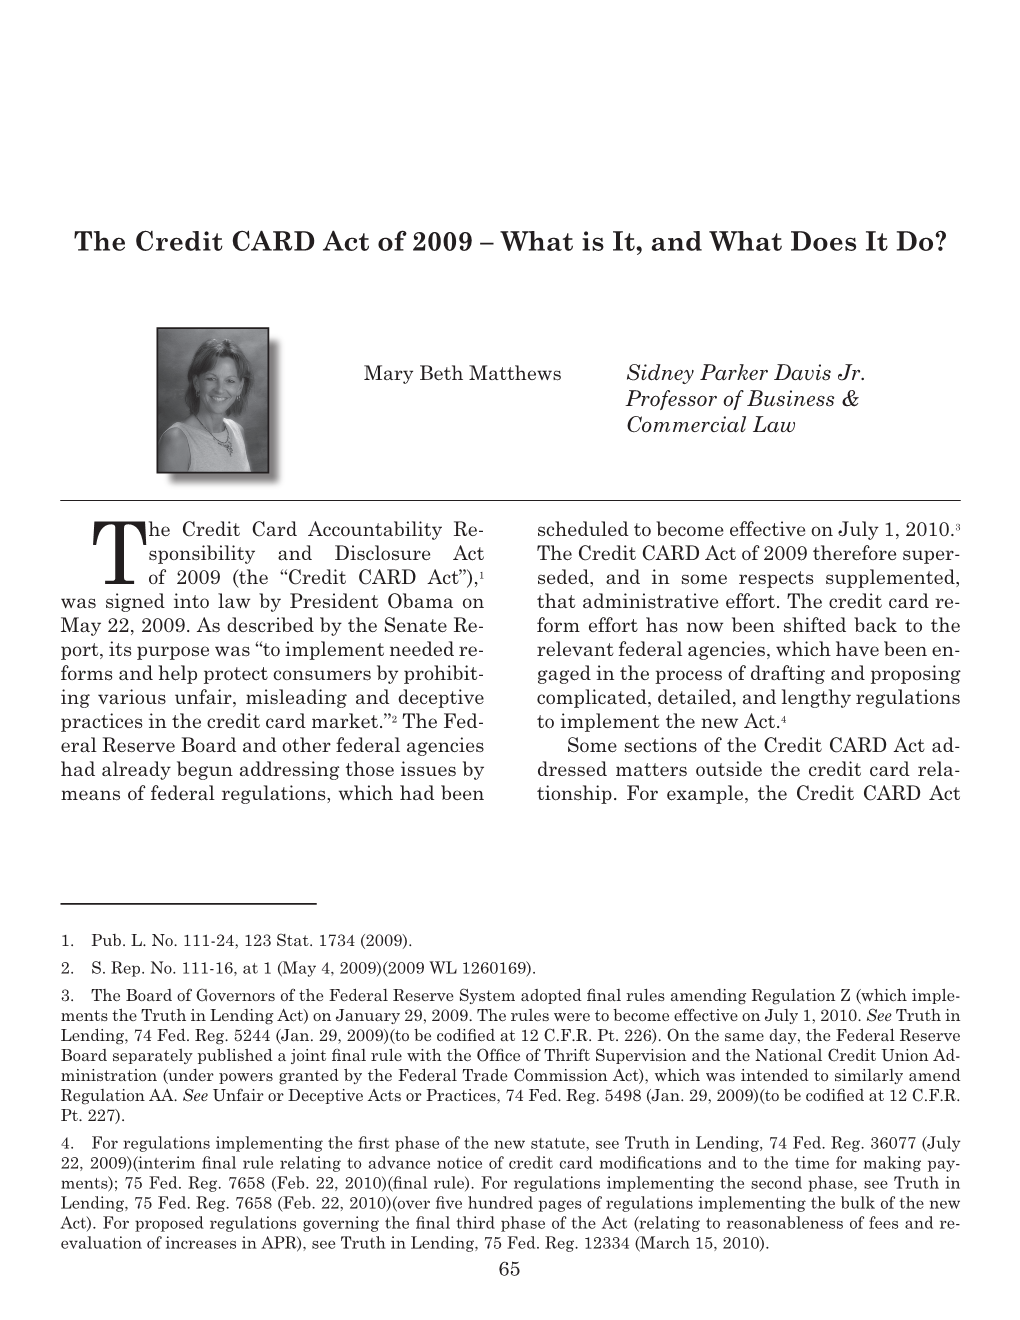 The Credit CARD Act of 2009 – What Is It, and What Does It Do?